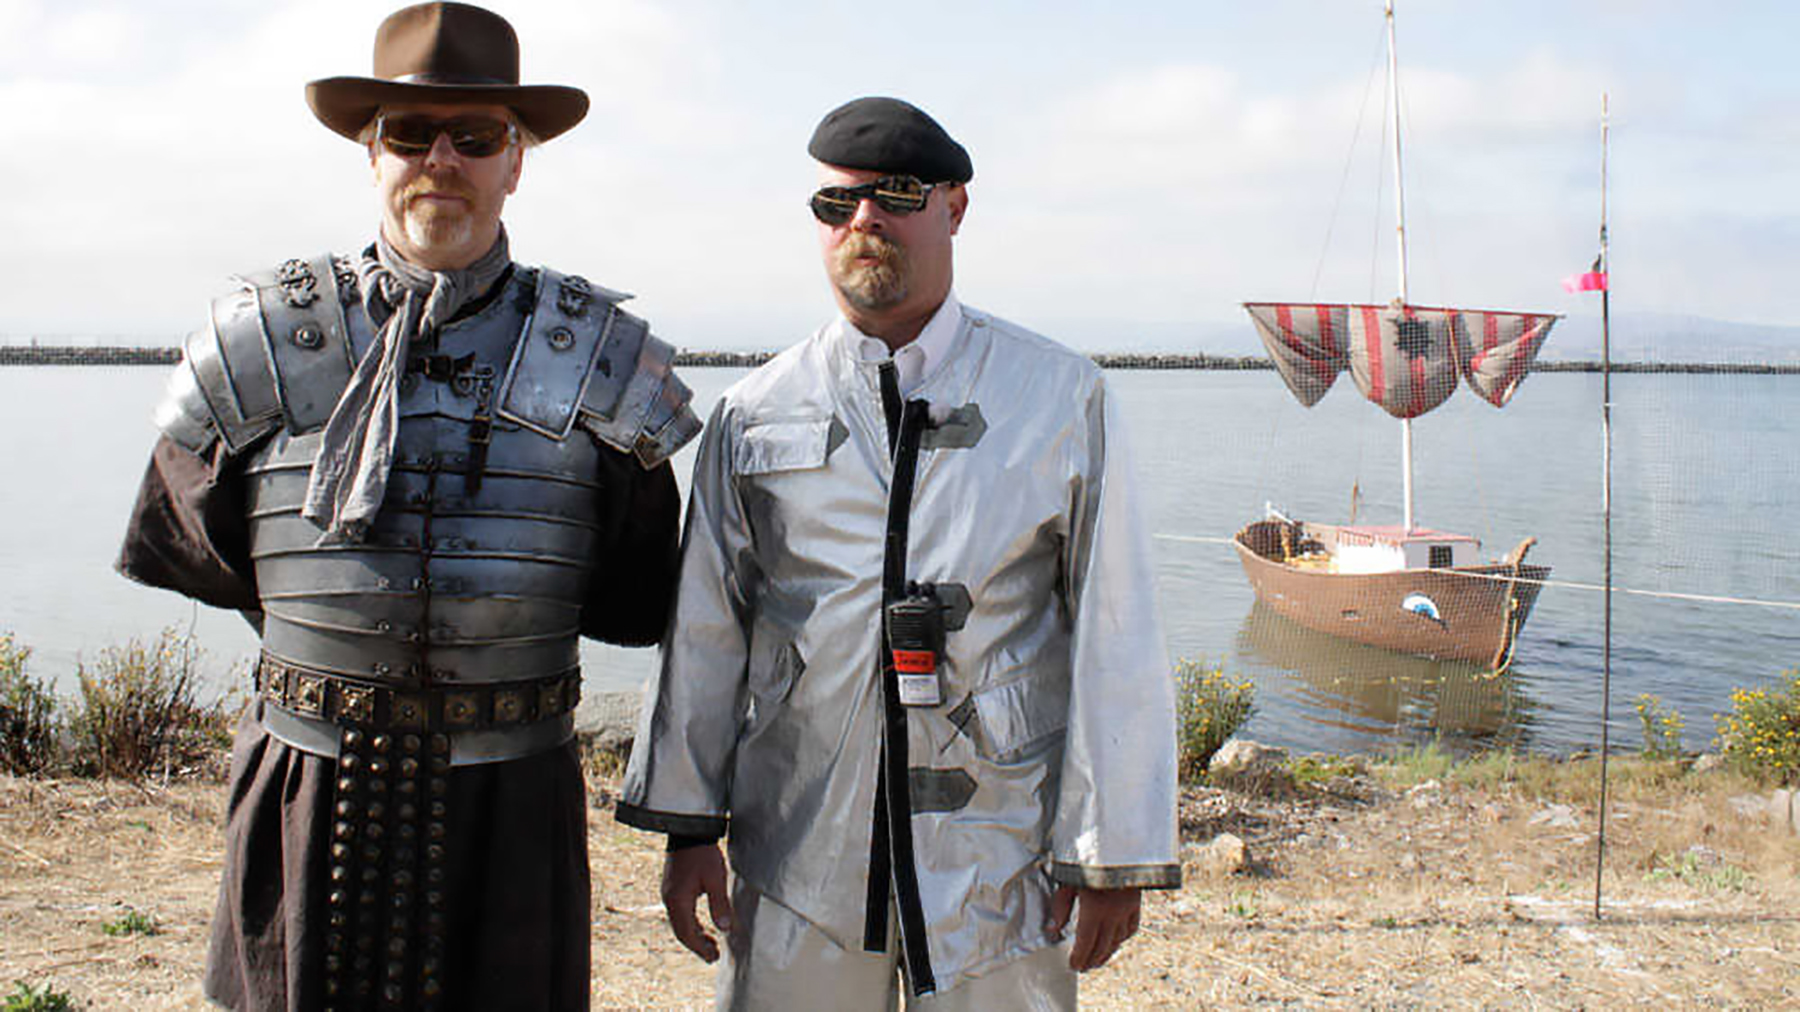 MythBusters hosts Adam Savage and Jamie Hyneman standing on a beach in front of an ancient-looking sailboat.